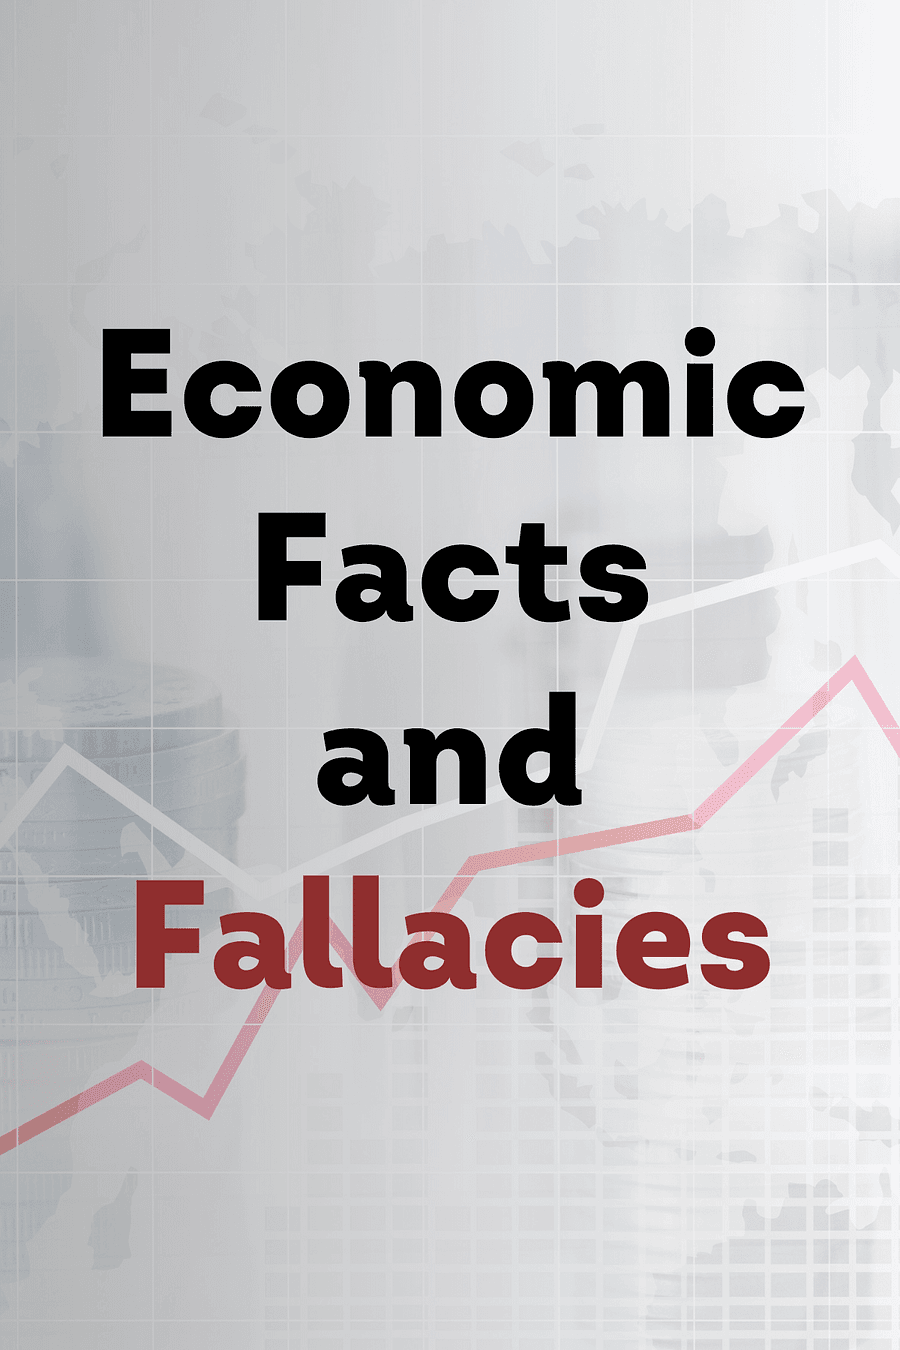 Economic Facts and Fallacies by Thomas Sowell - Book Summary